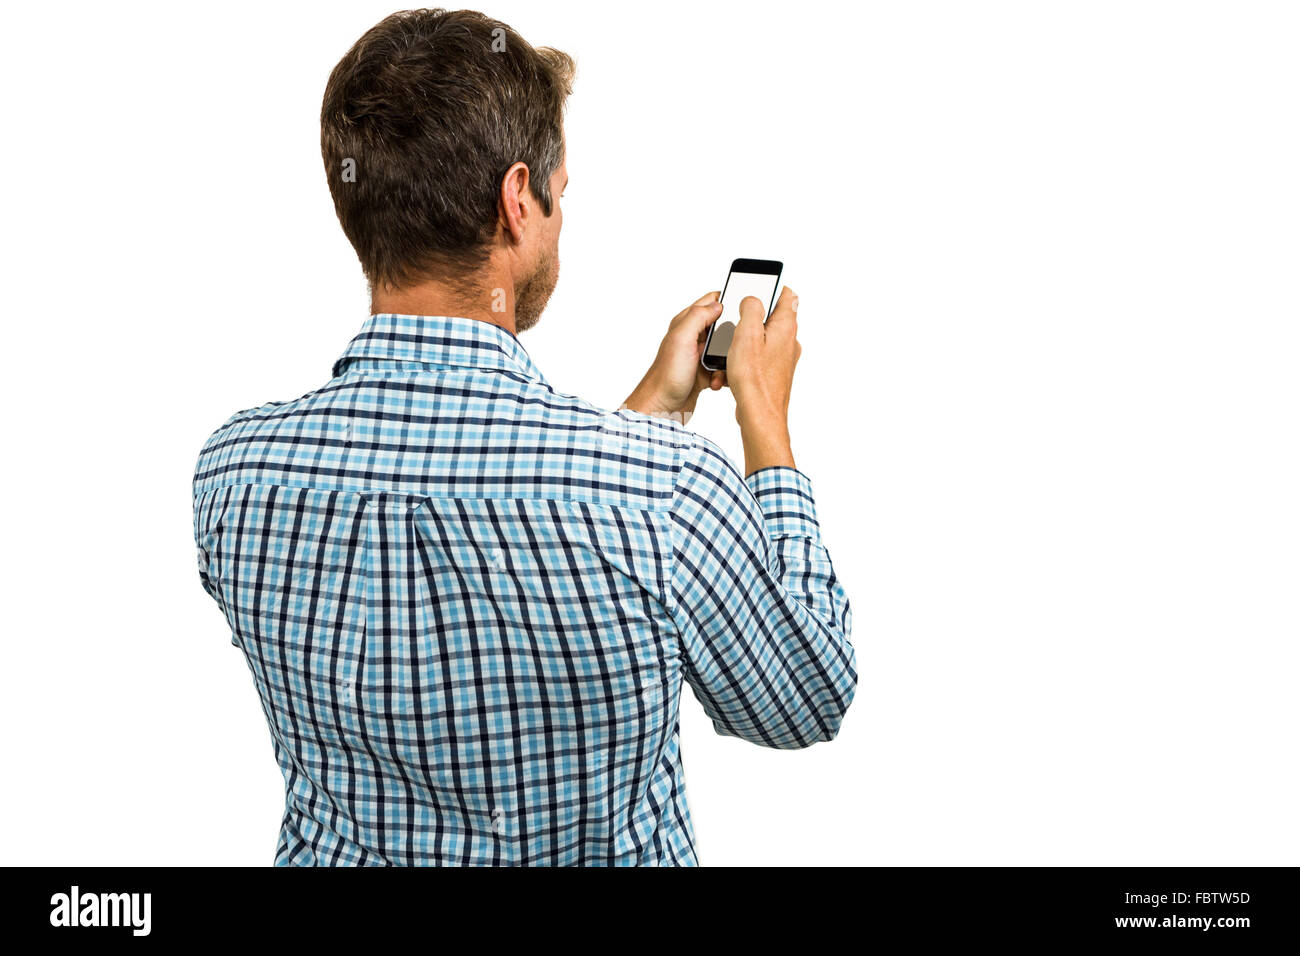 Rear view of man using smartphone Stock Photo